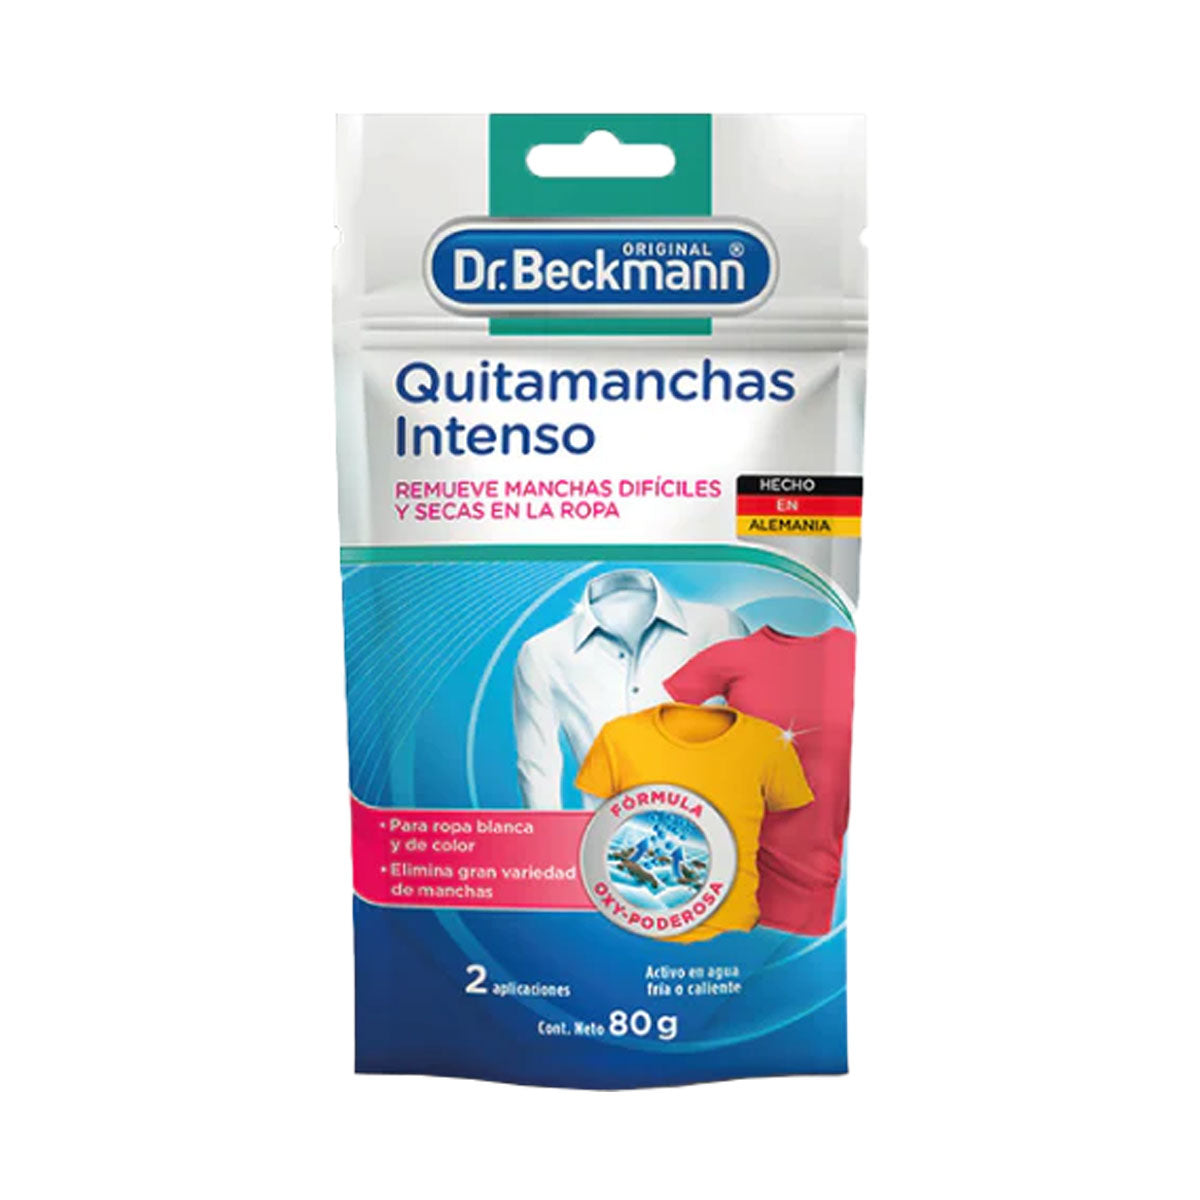 Quitamanchas Intenso para Ropa 80 gr Dr. Beckmann. Producto Alemán Sustentable